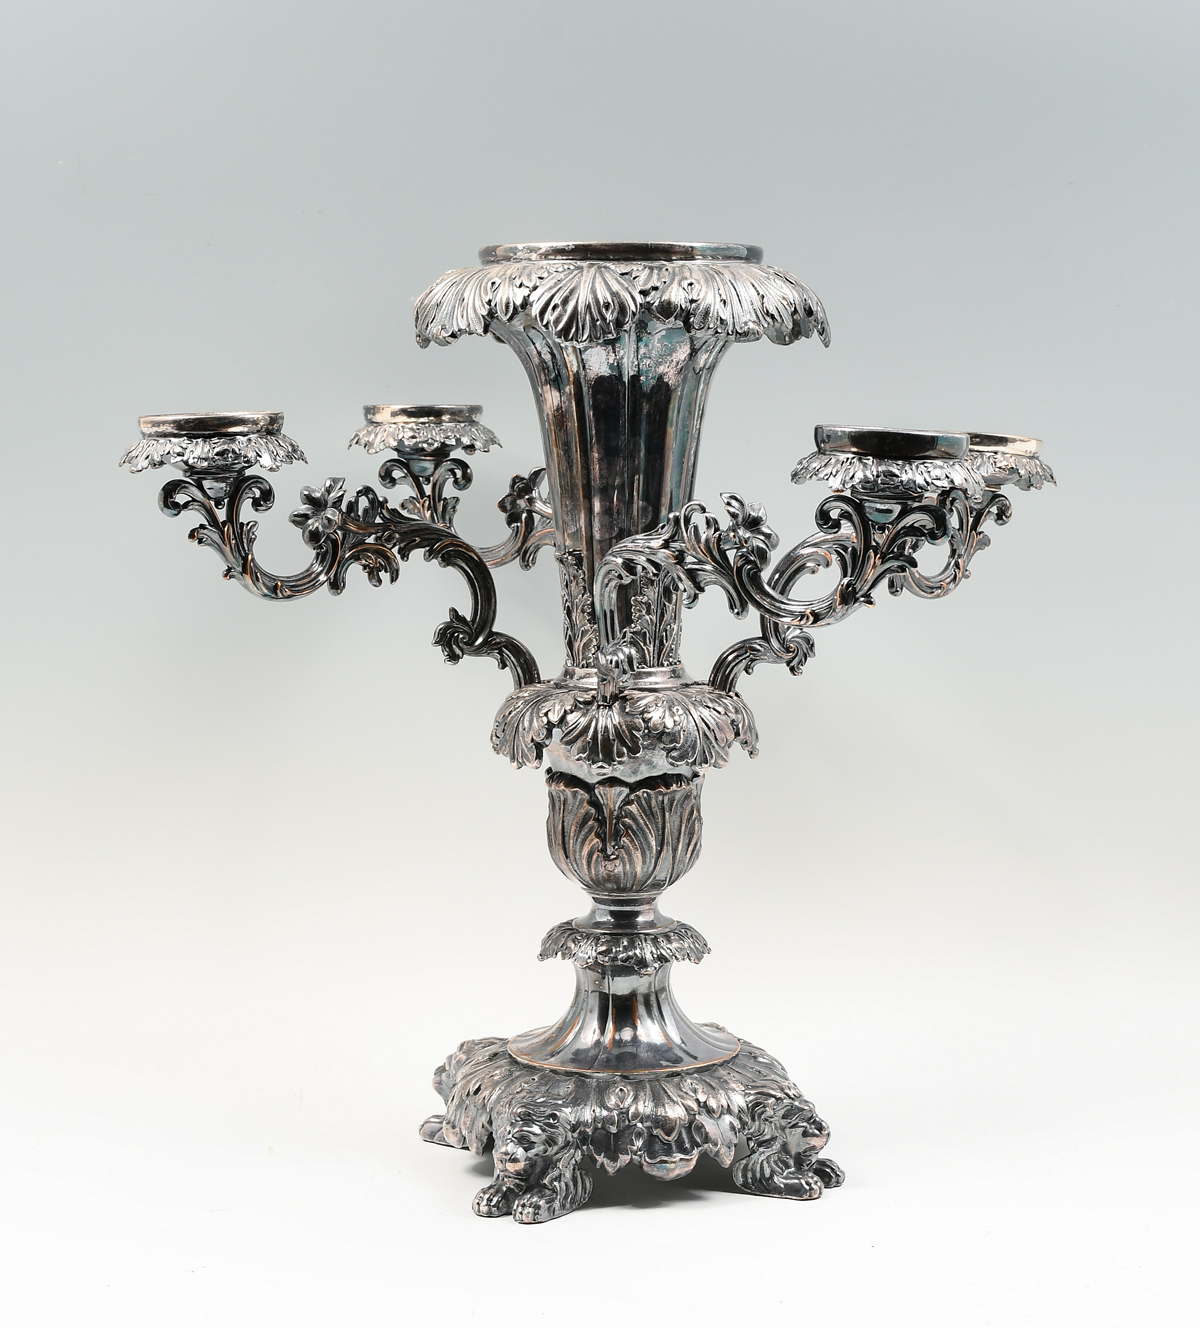 HIGHLY ORNATE SILVERPLATED EPERGNE: